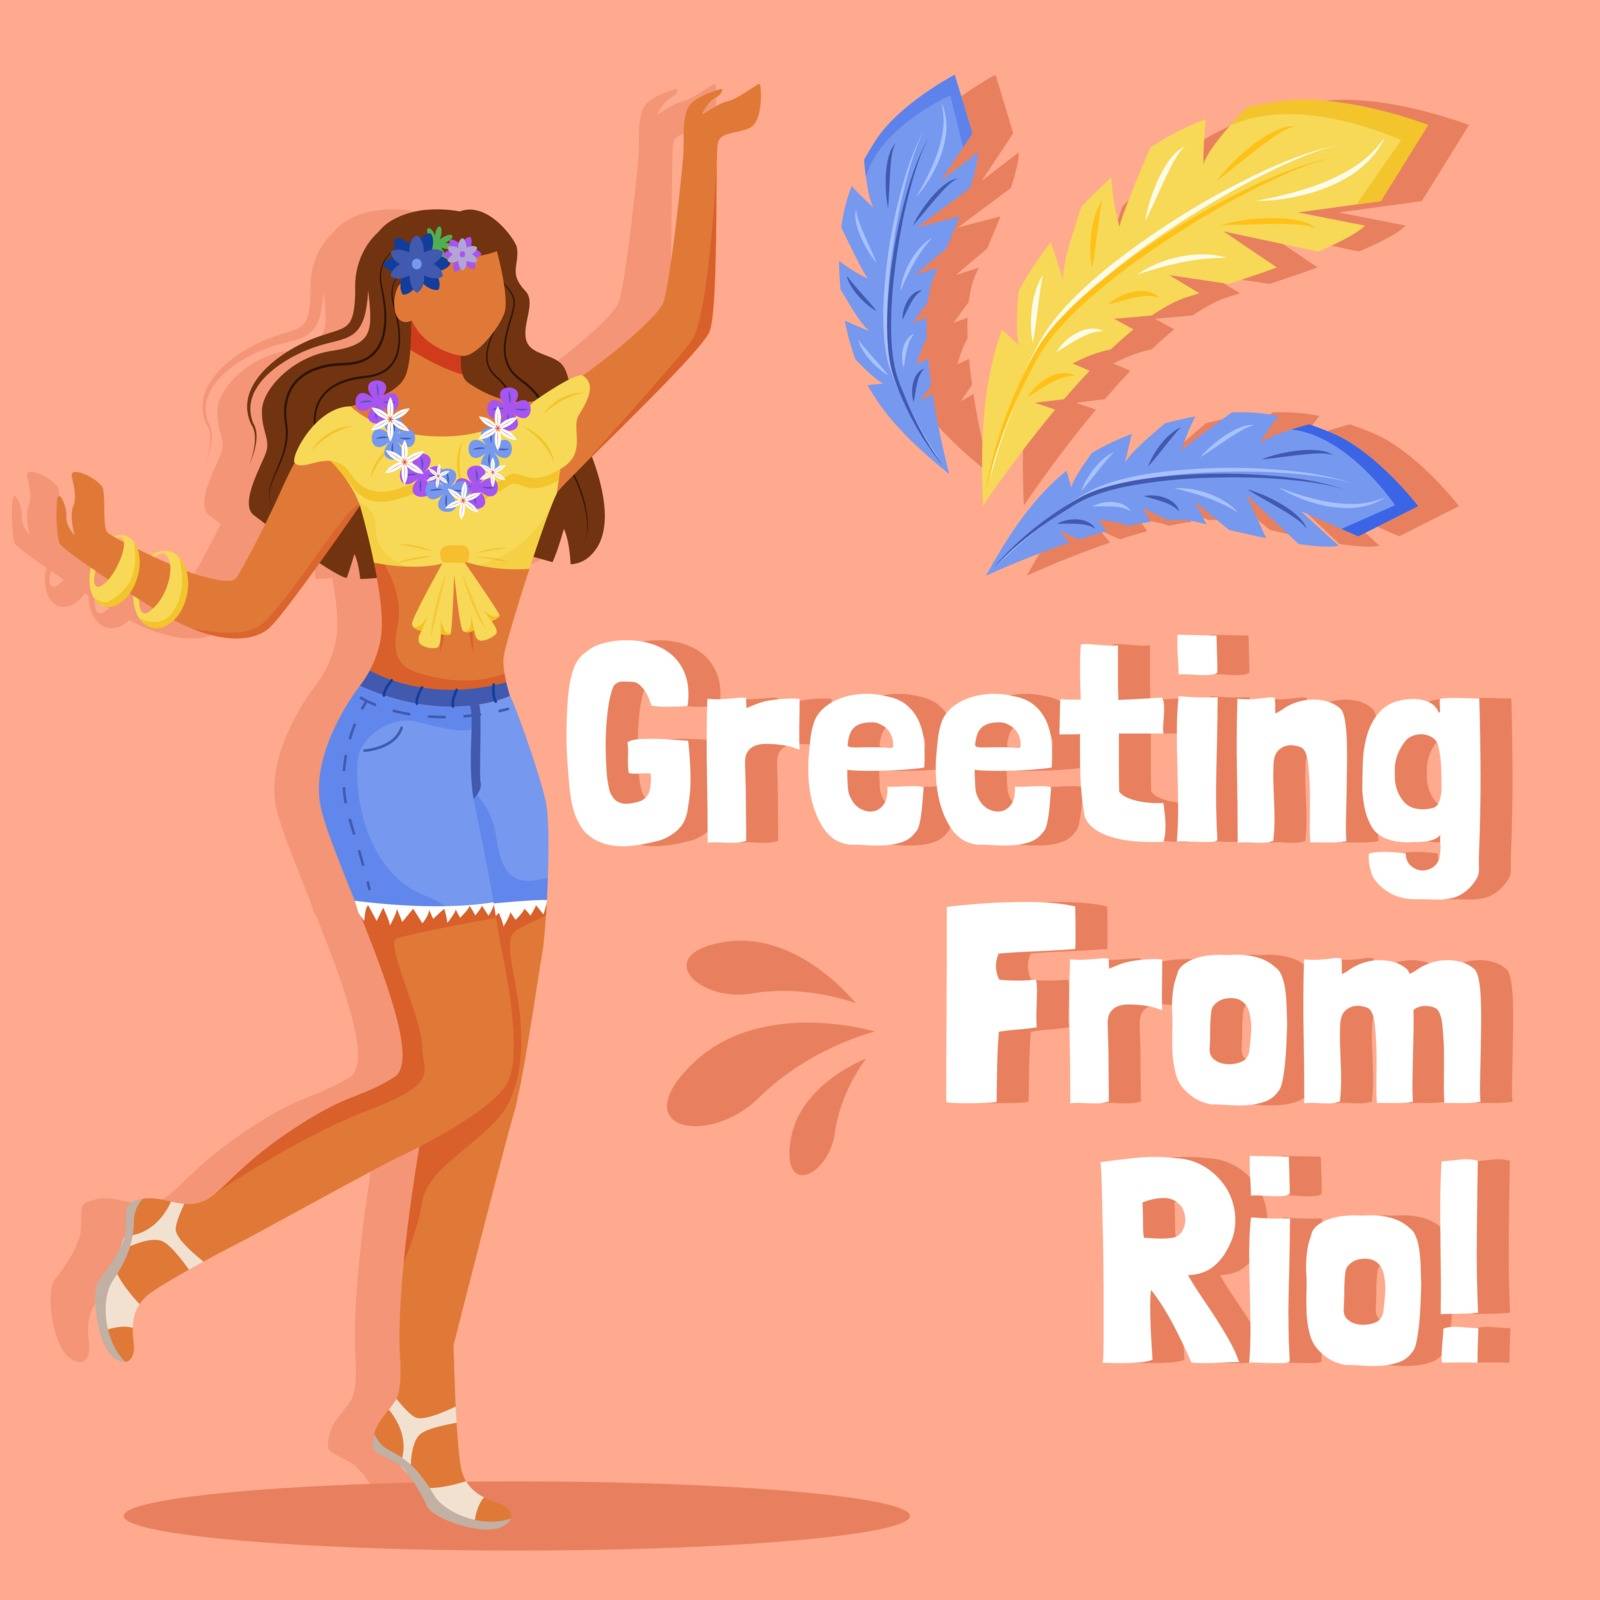 Brazil carnival social media post mockup. Greeting from Rio phrase. Web banner design template. Female in floral adornment booster, content layout, inscription. Poster, print ads and flat illustration by ntl